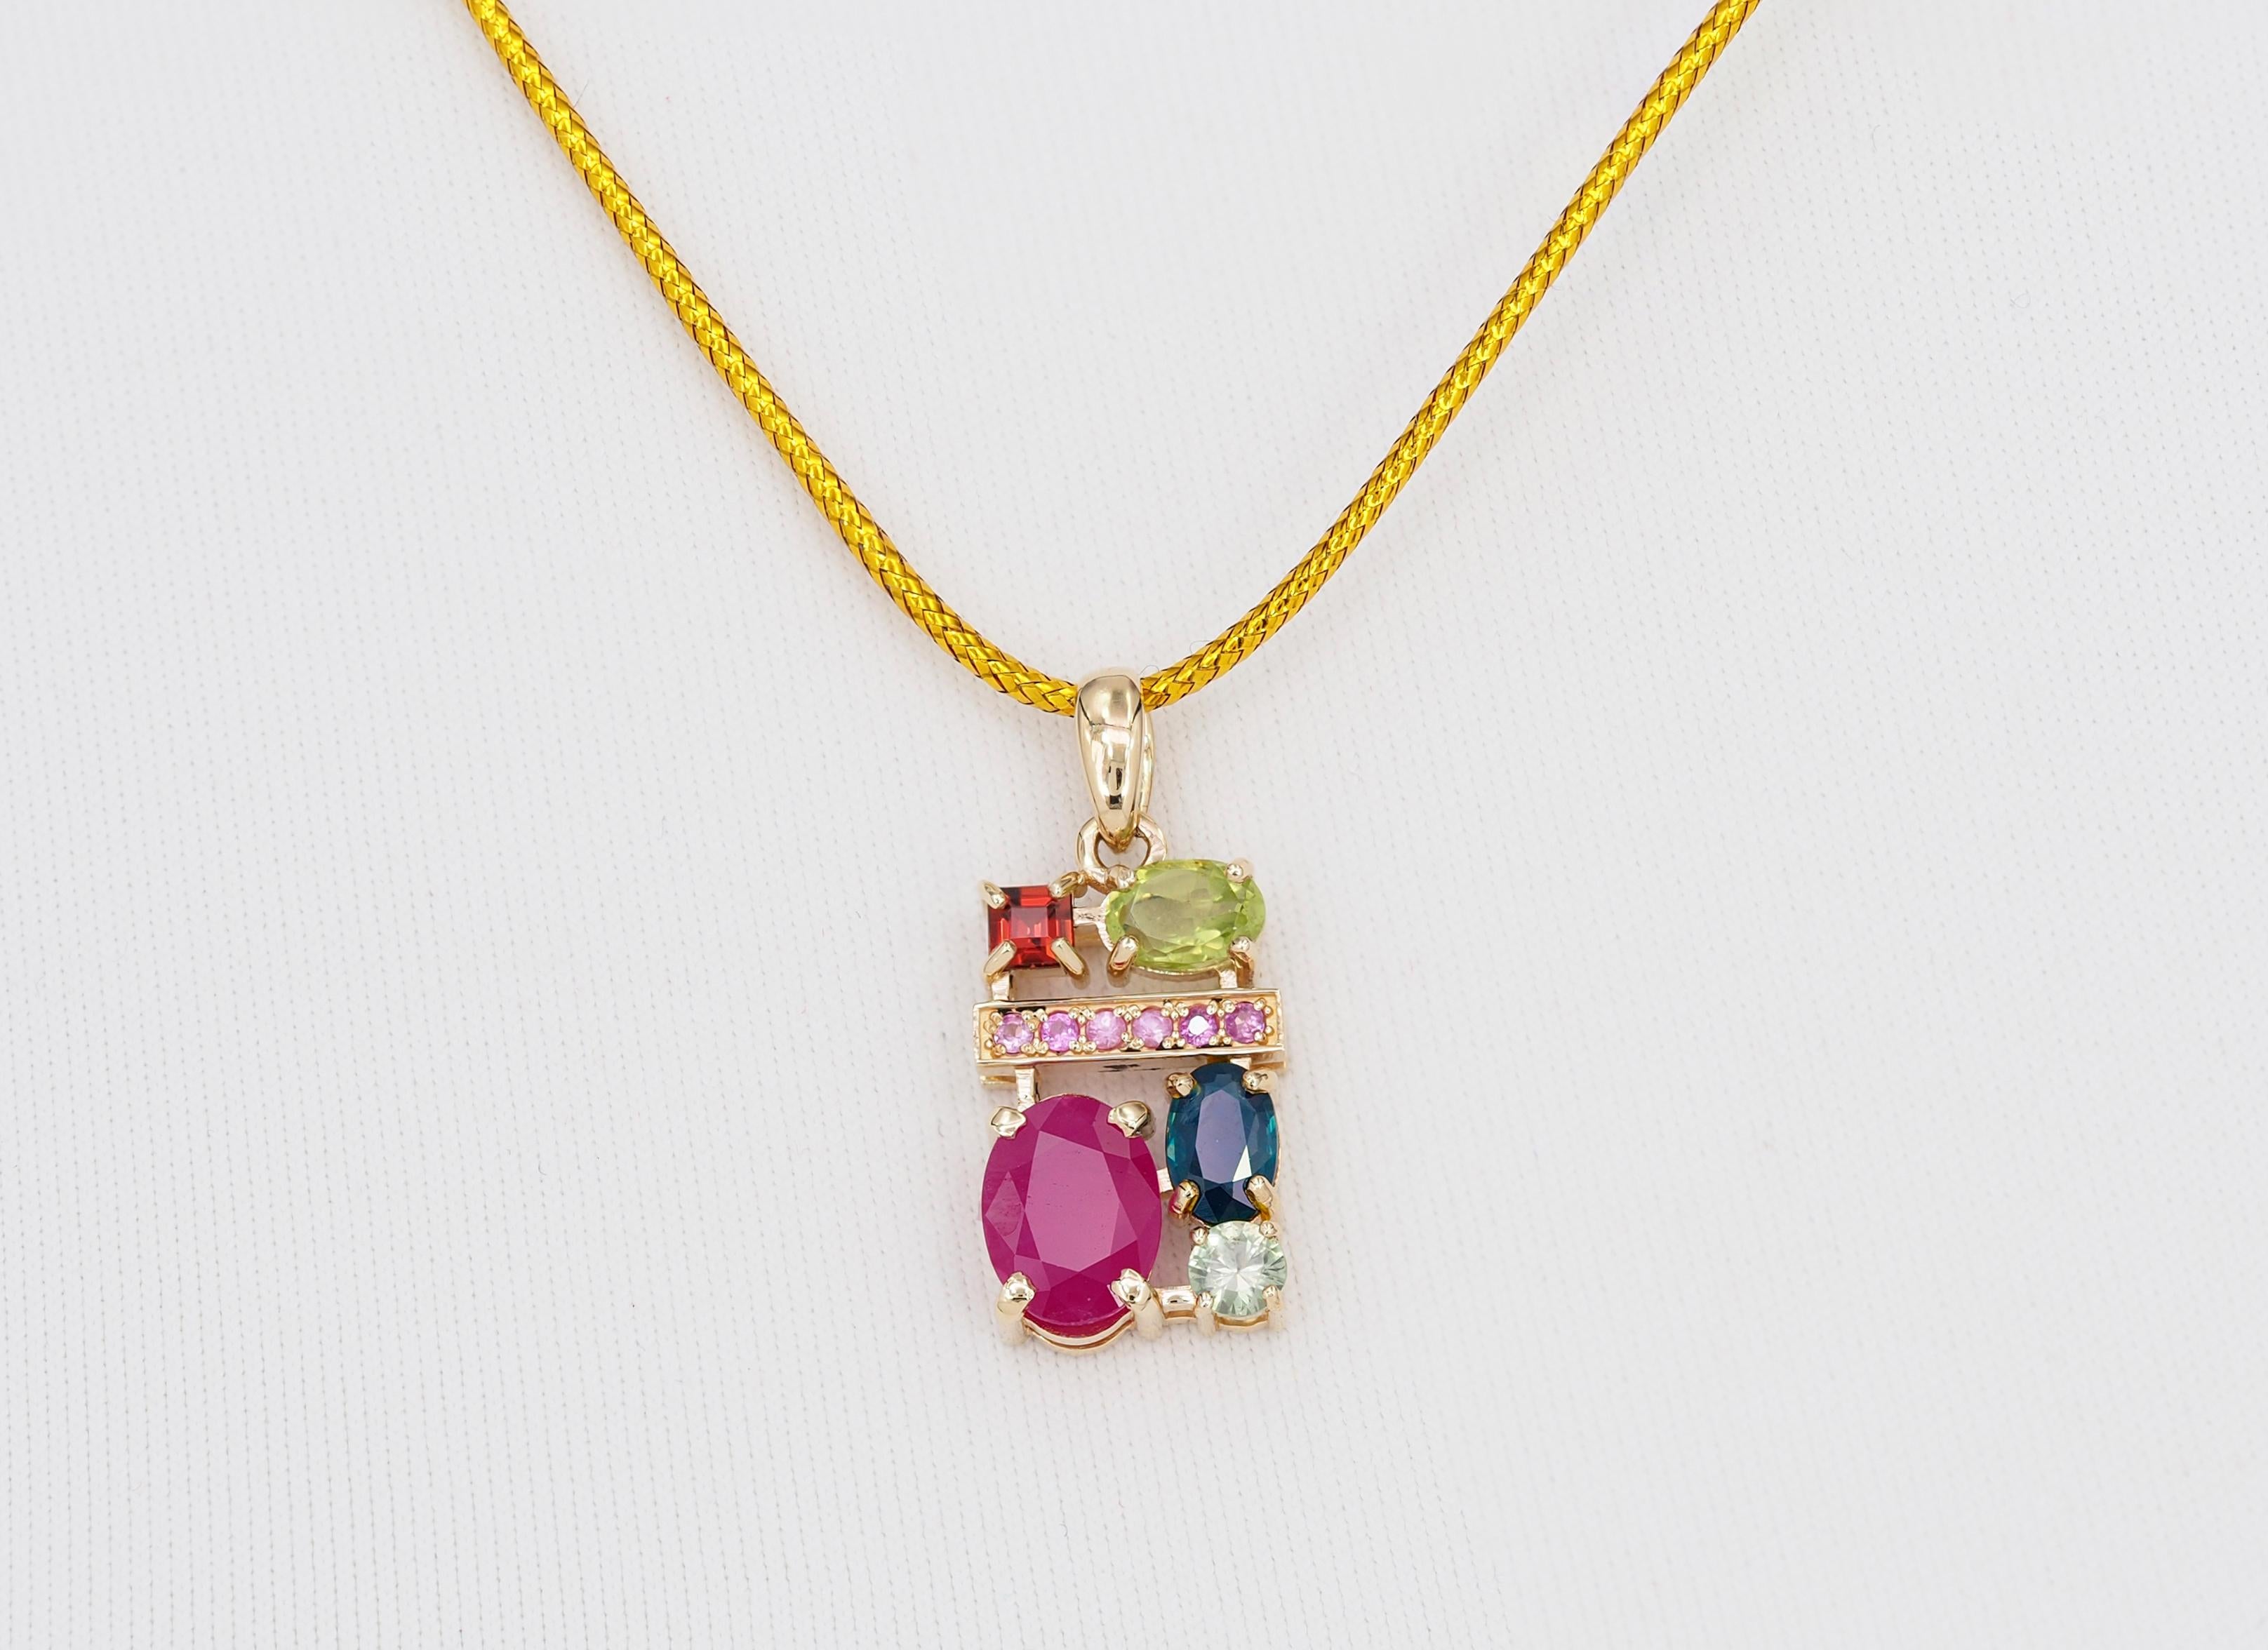 Ruby, sapphire, peridot, tourmaline, garnet and side pink sapphires vintage pendant.

Metal: 14k gold
WEight - 2.85 gr
Pendant size - 26x10.6 mm

Gemstones:
Ruby - 1.3 ct, red color, transparent, oval cut
Sapphire - 0.8 ct, blue color, transparent,